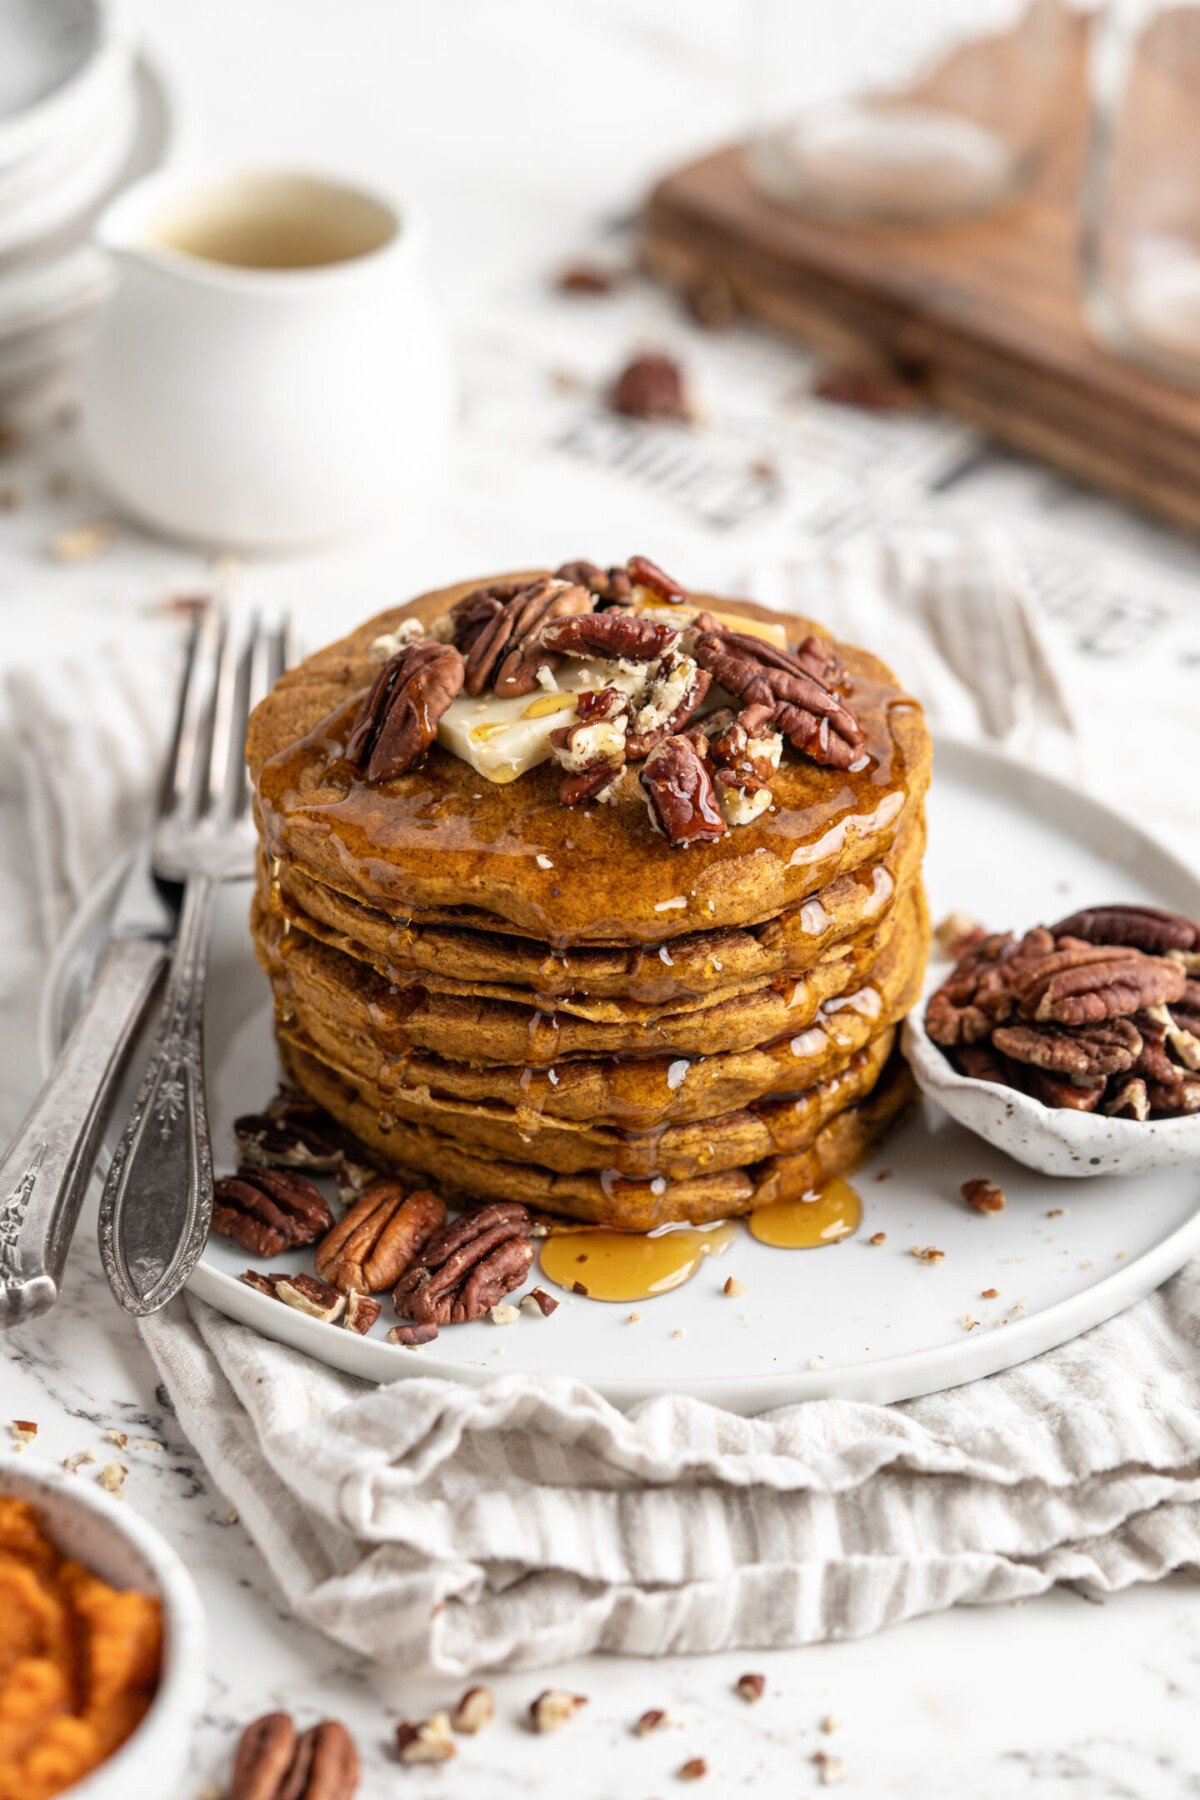 Overhead view of a stack of pumpkin pancakes on a plate, topped with nuts, next to a bowl of nuts and a fork.